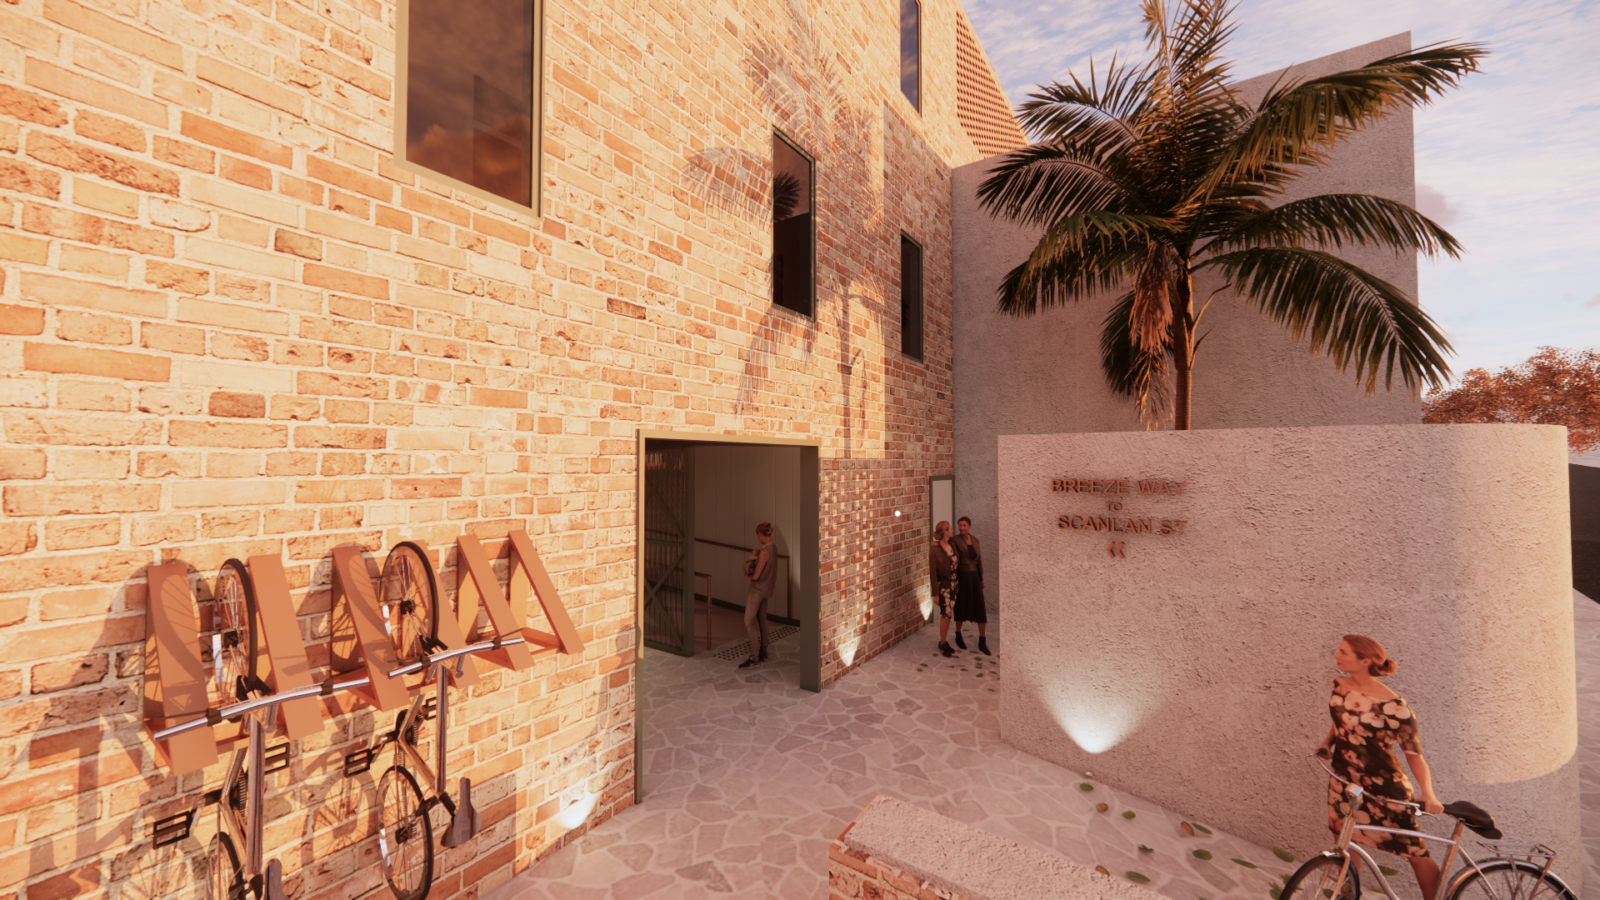 Building entrance with patient walking bike towards bike rack. Palm tree in courtyard casts a shadow on the brick.